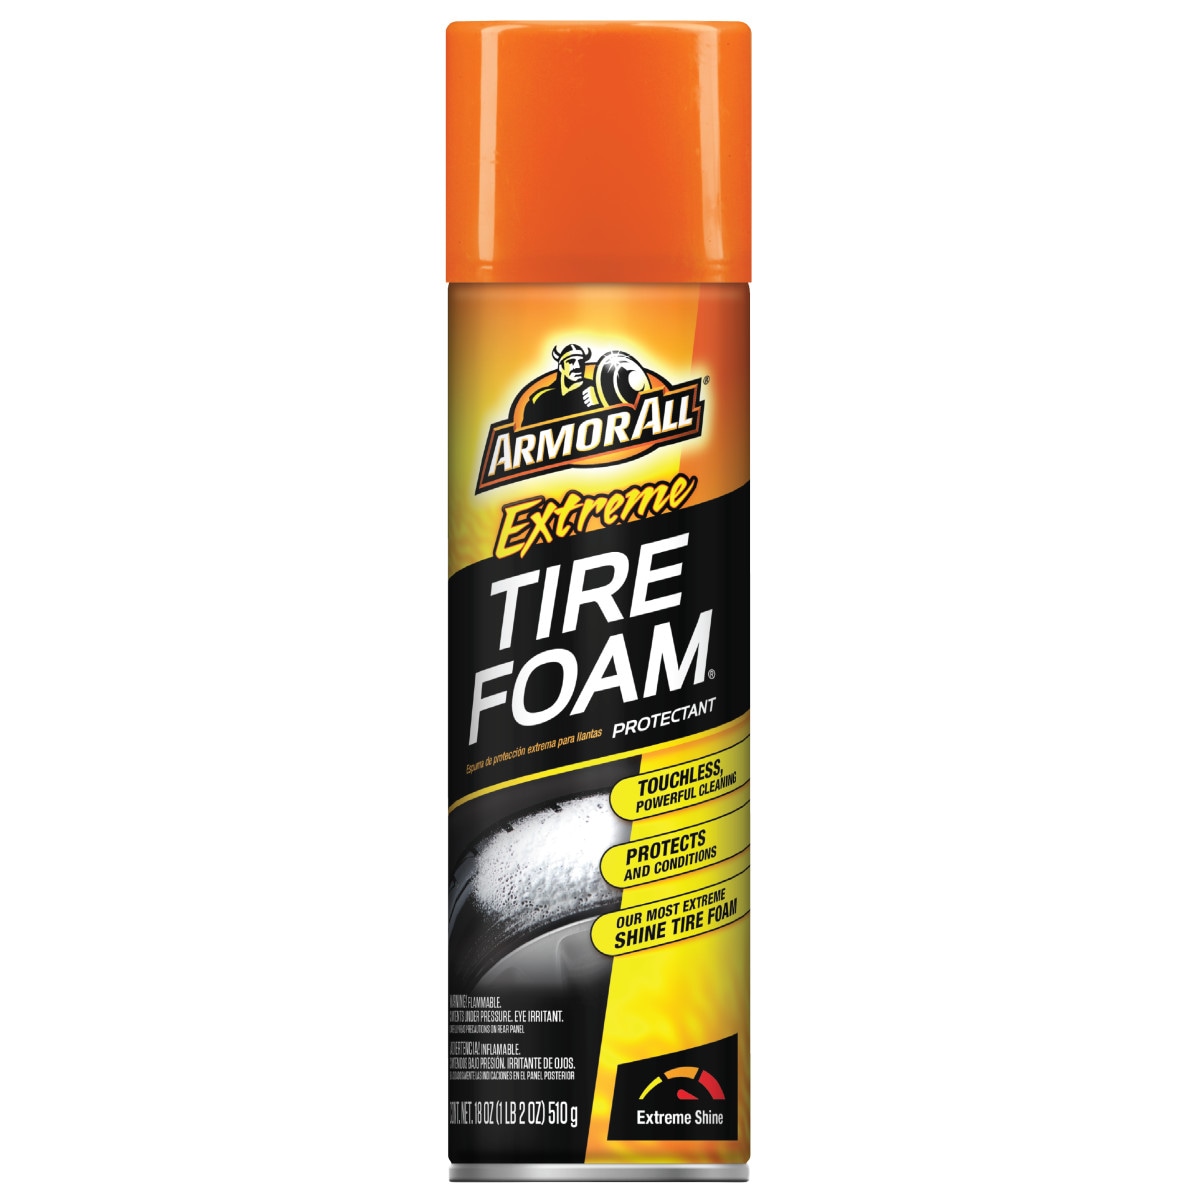 Armor All Extreme Tire Foam Protectant (18 oz.)